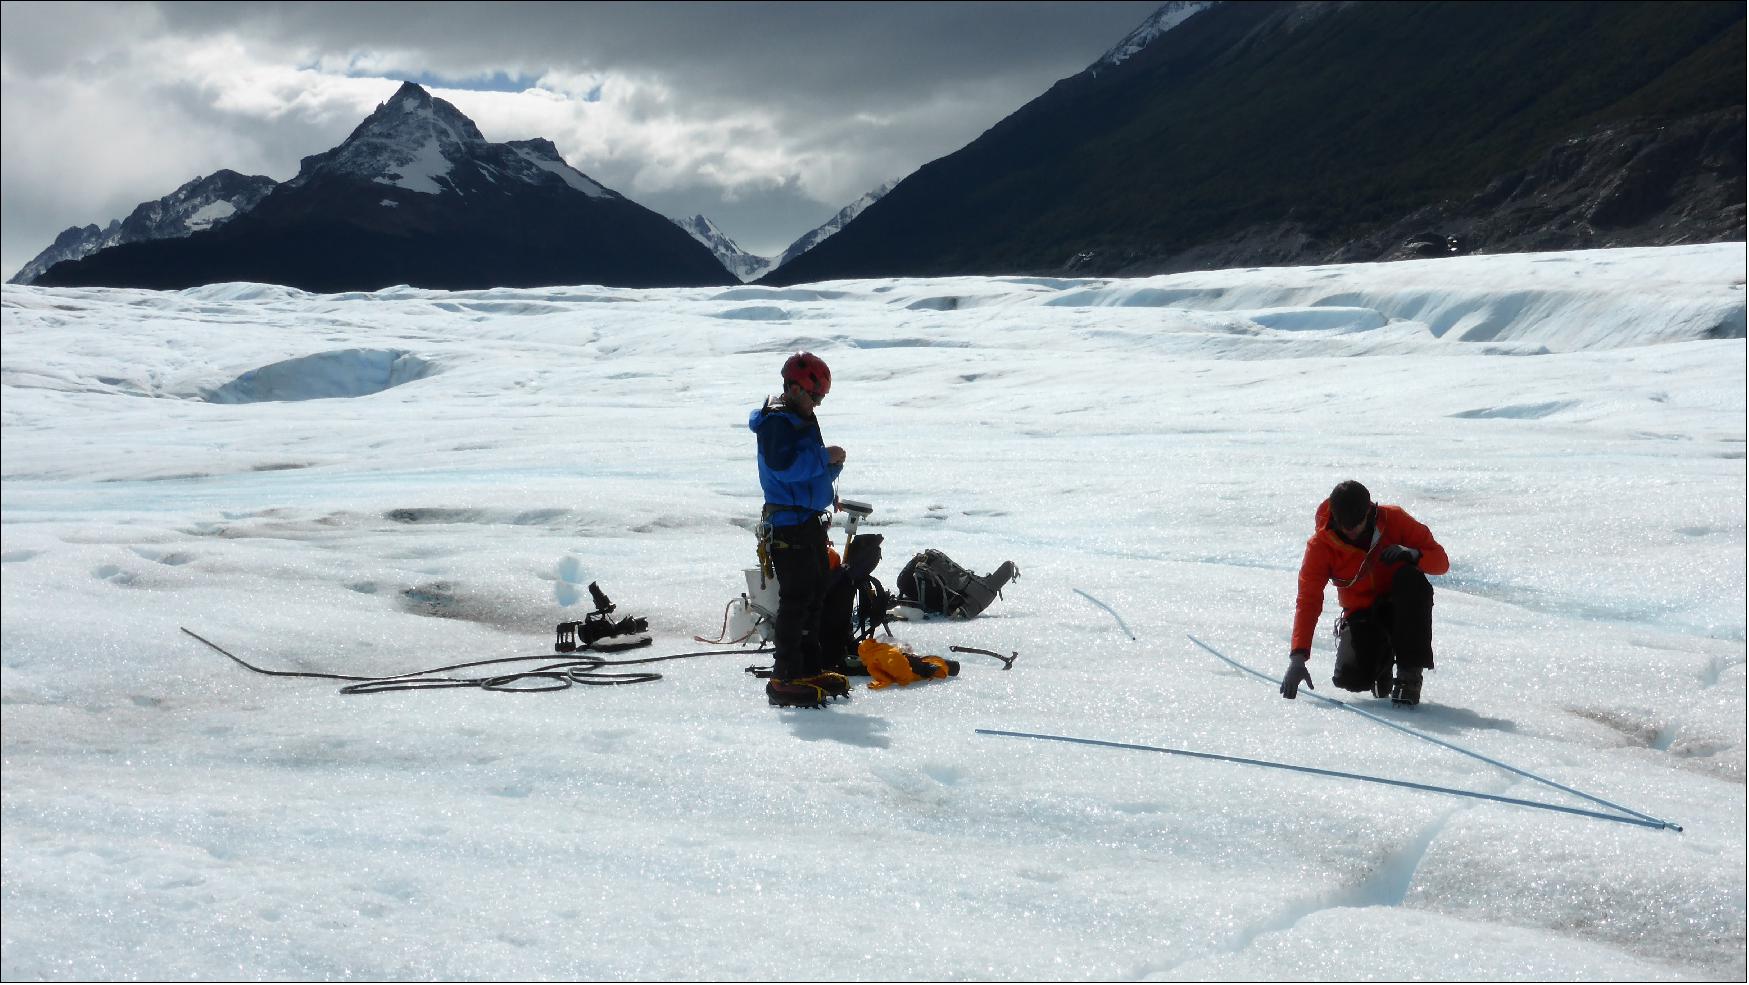 Figure 28: On-site glacier measurements. Glaciological ground measurements on the Gray Glacier in Argentina. Poles are drilled into the glacier to measure the rate of melting. Such measurements serve as references for analysis using satellite data (image credit: FAU, Matthias Braun)